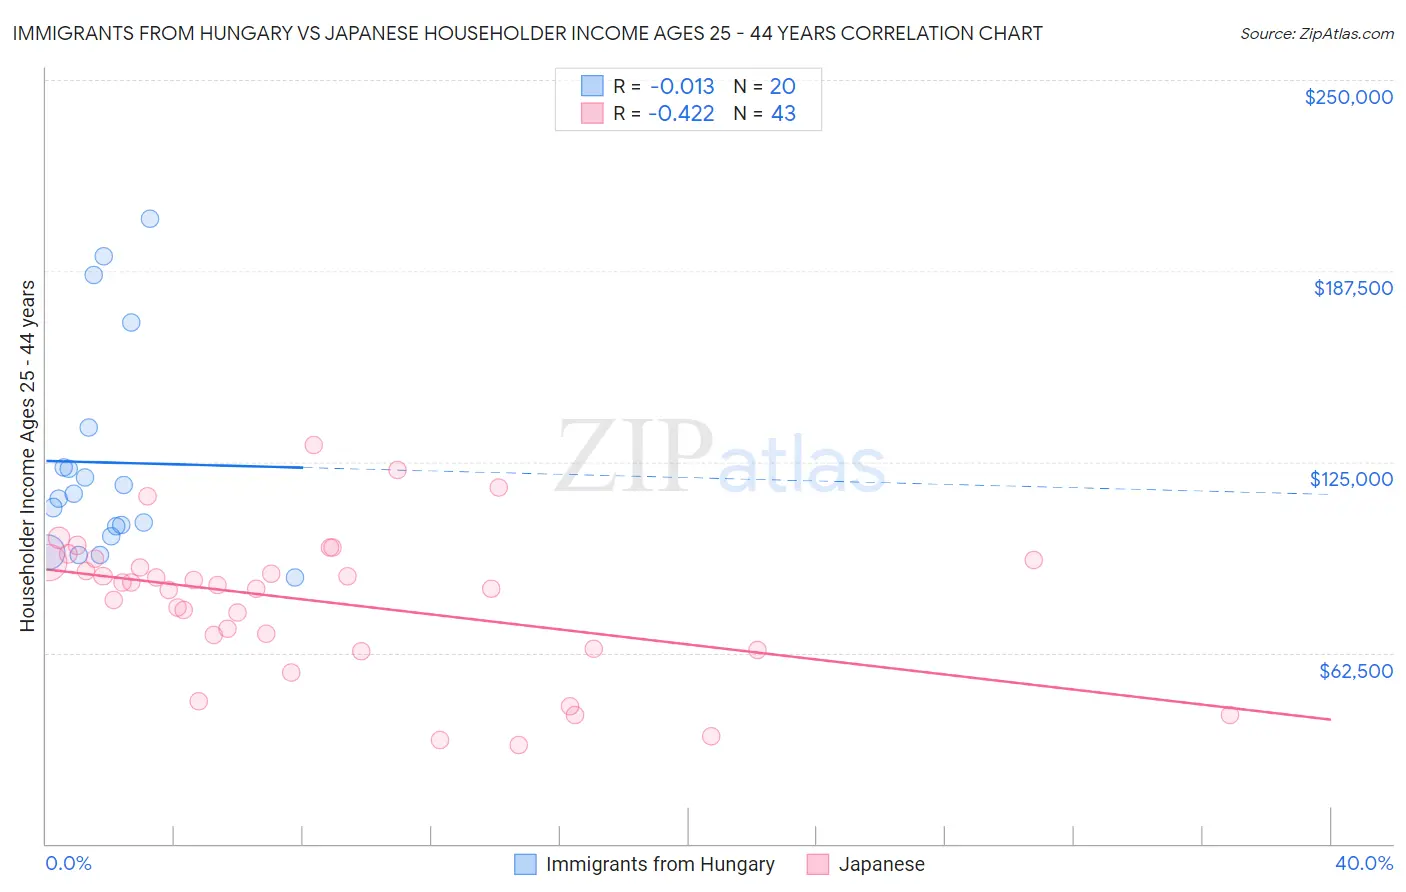 Immigrants from Hungary vs Japanese Householder Income Ages 25 - 44 years